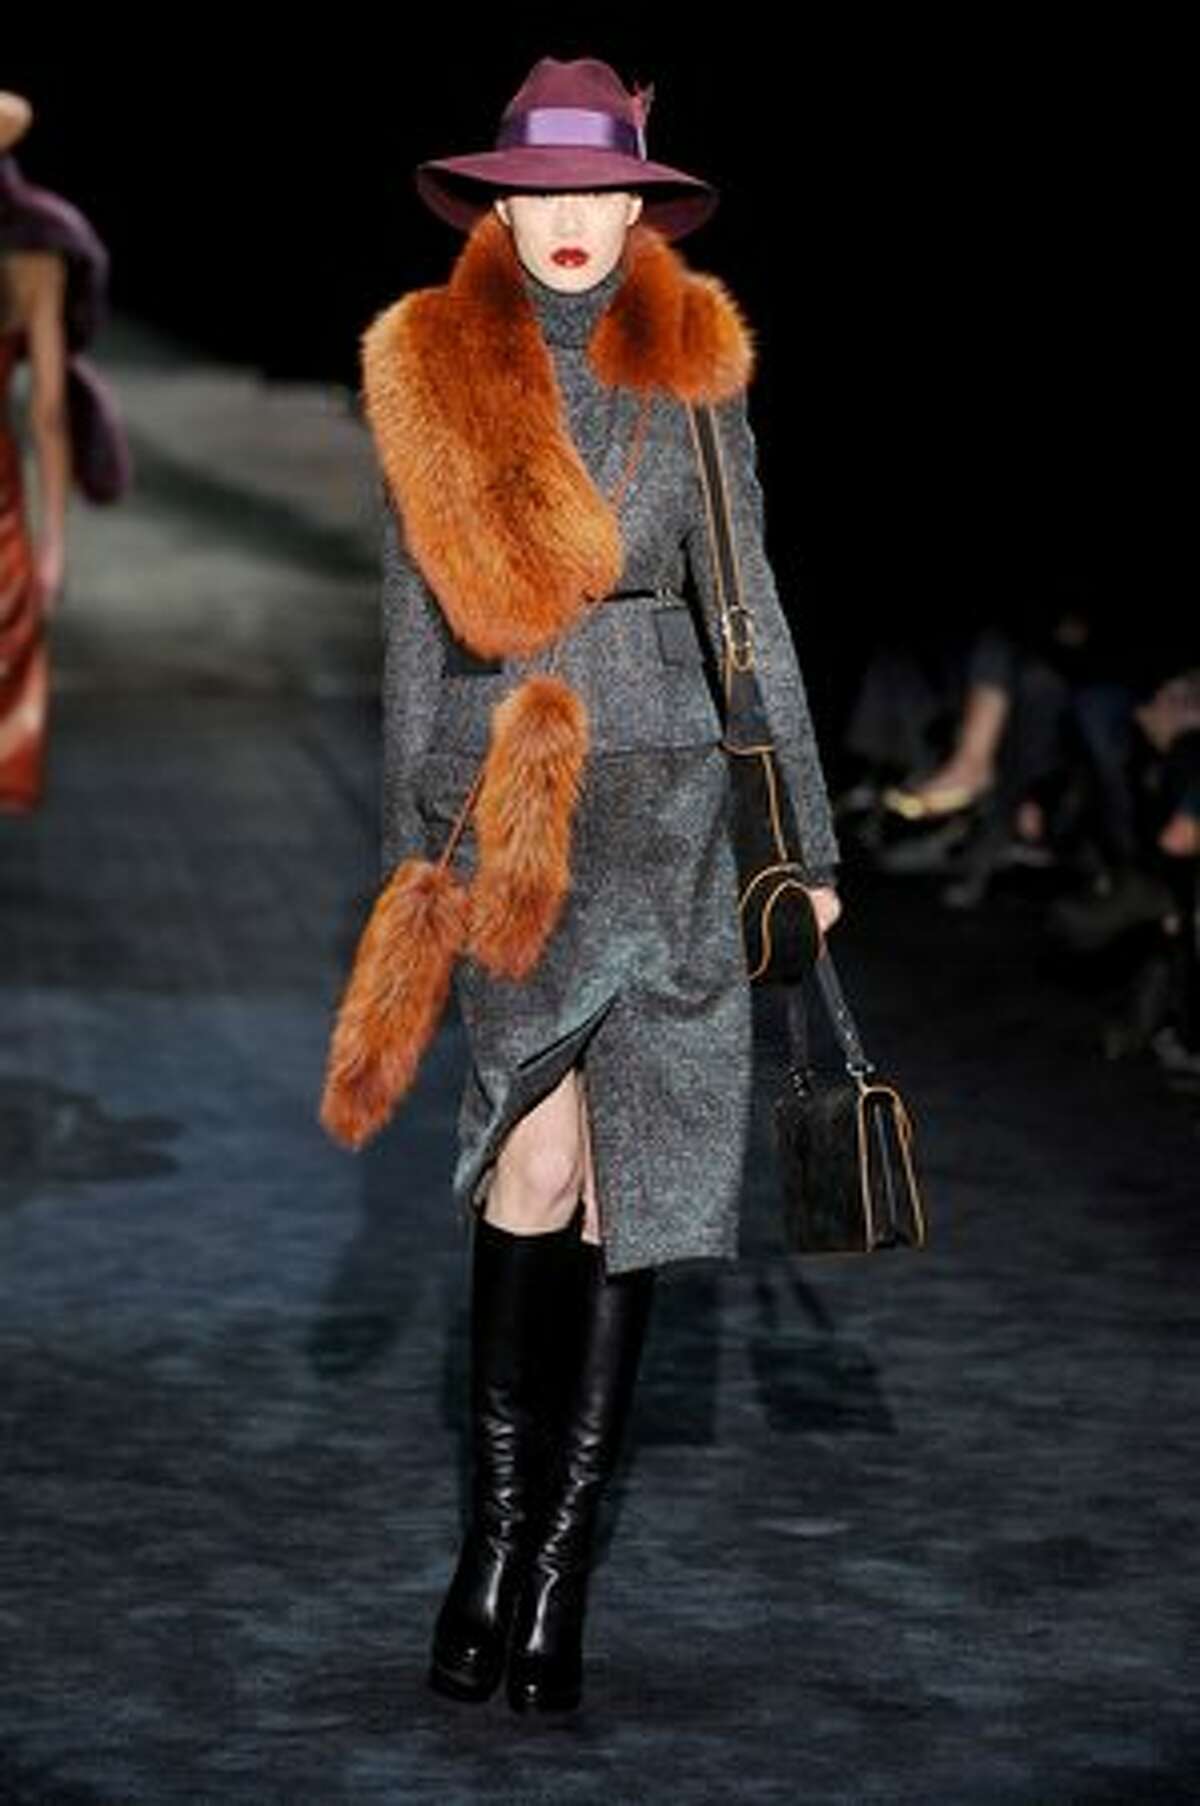 A model walks the runway during the Gucci Fashion Show as part of Milan Fashion Week Womenswear Autumn/Winter 2011on February 23, 2011 in Milan, Italy.